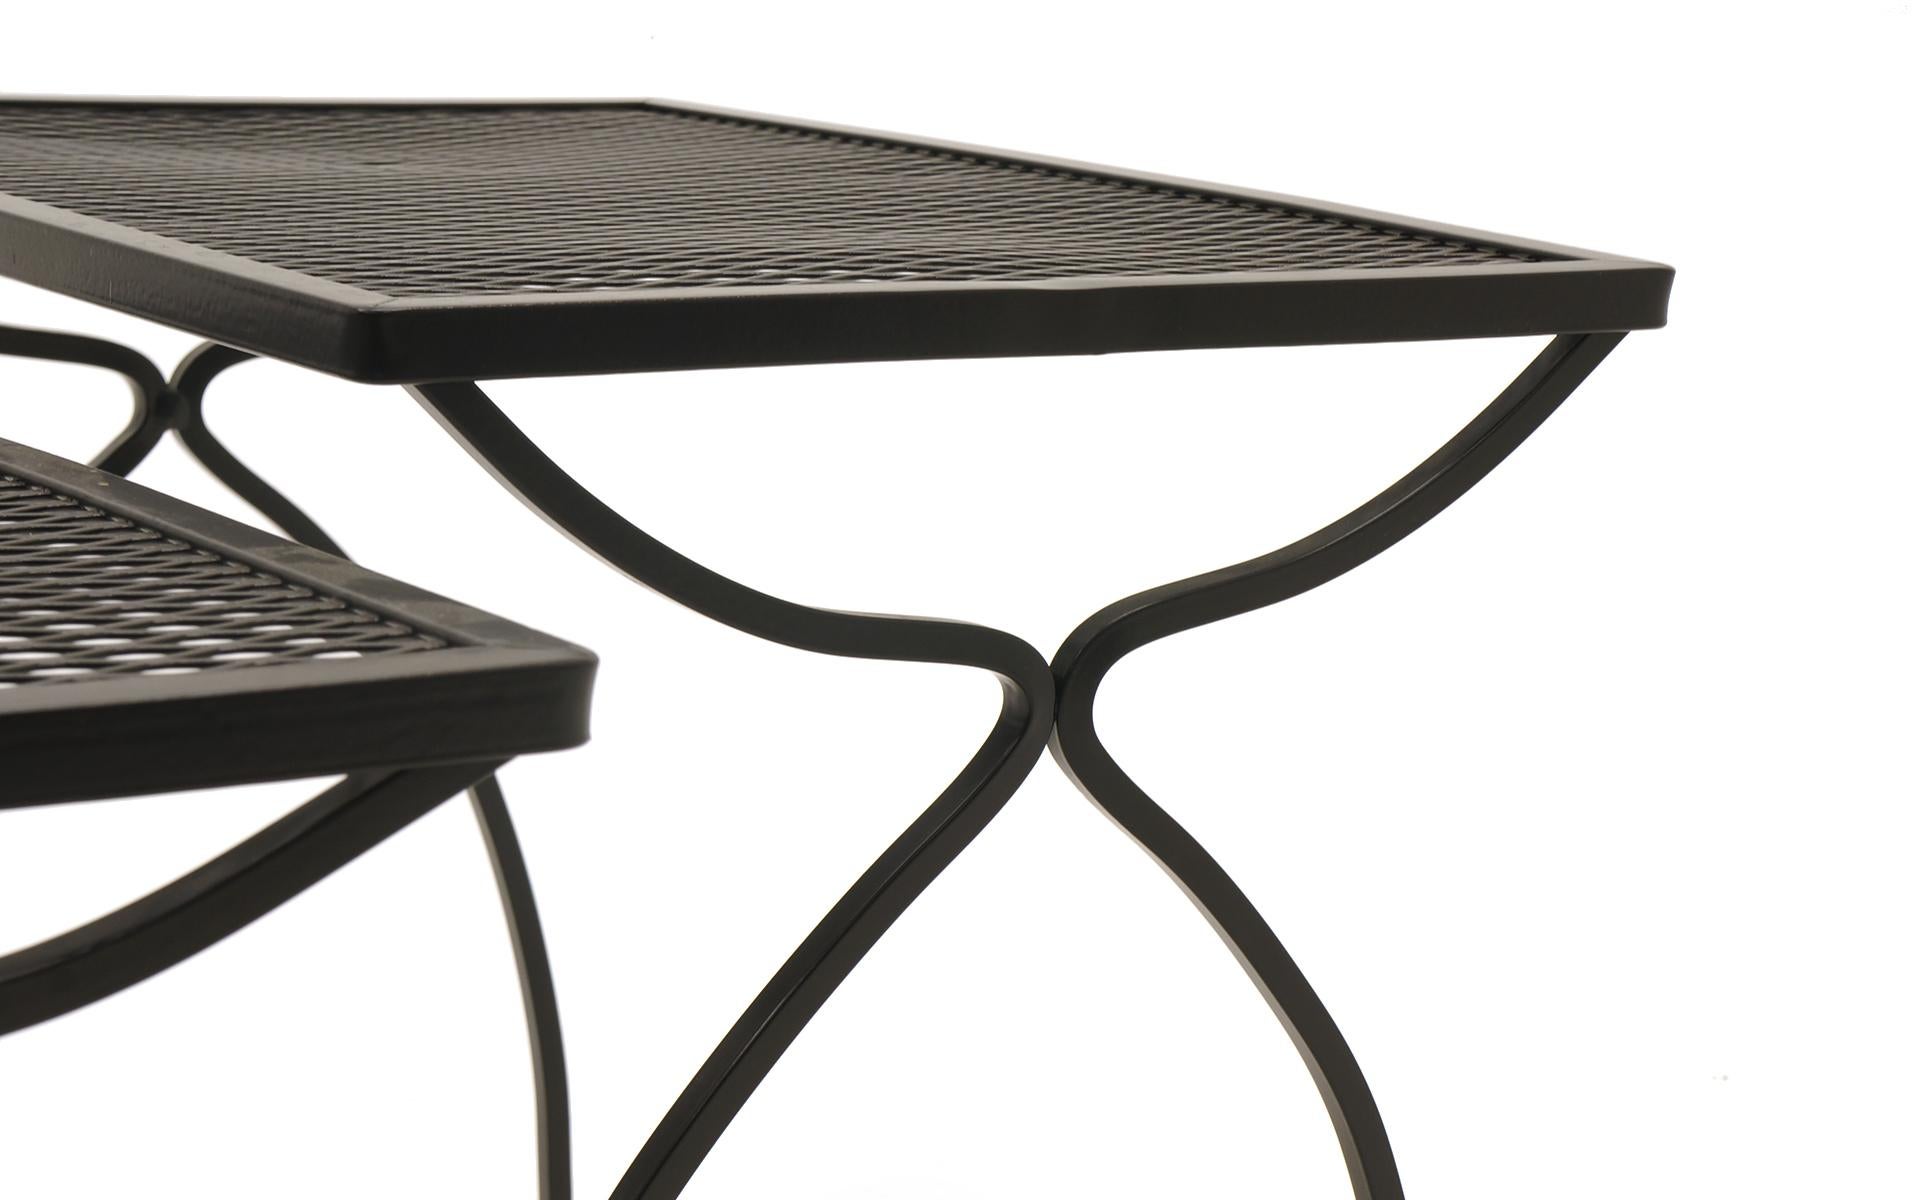 American Nesting Tables, Set of Three by John Salterini for Outdoor/Patio/ Pool Use